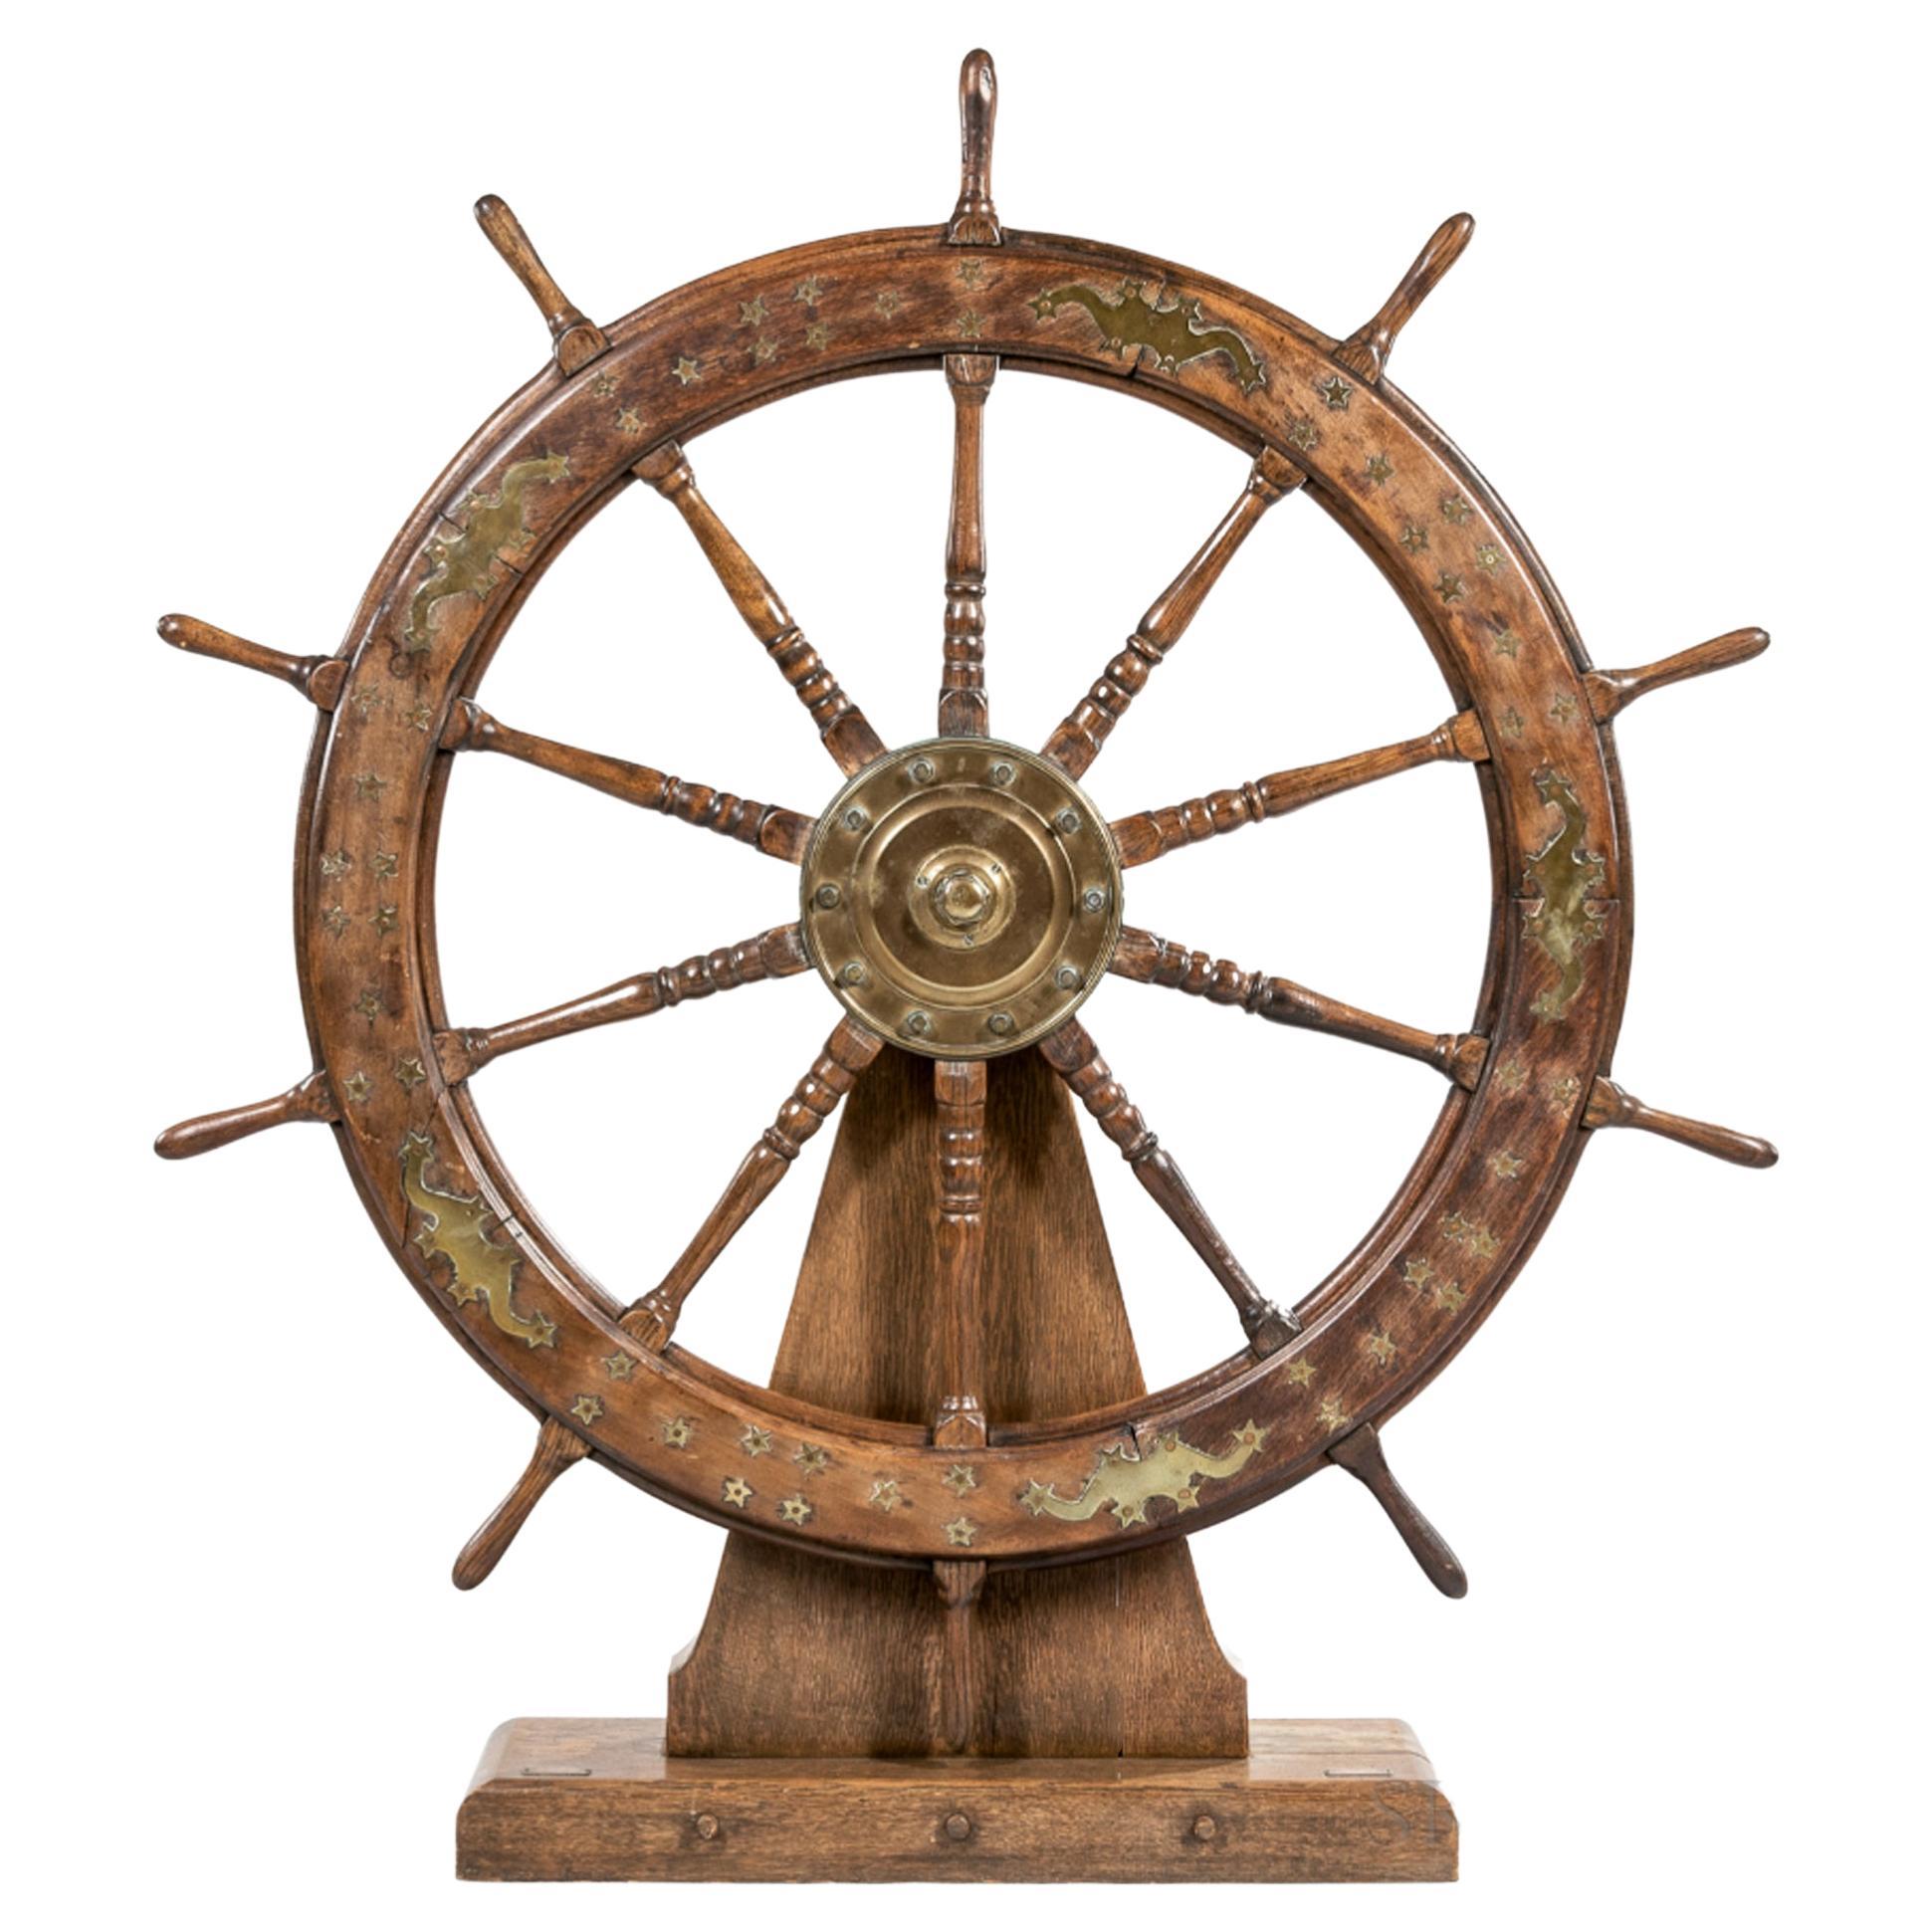 American Ship's Wheel or Helm with Brass Inlay of Stars & Shooting Stars